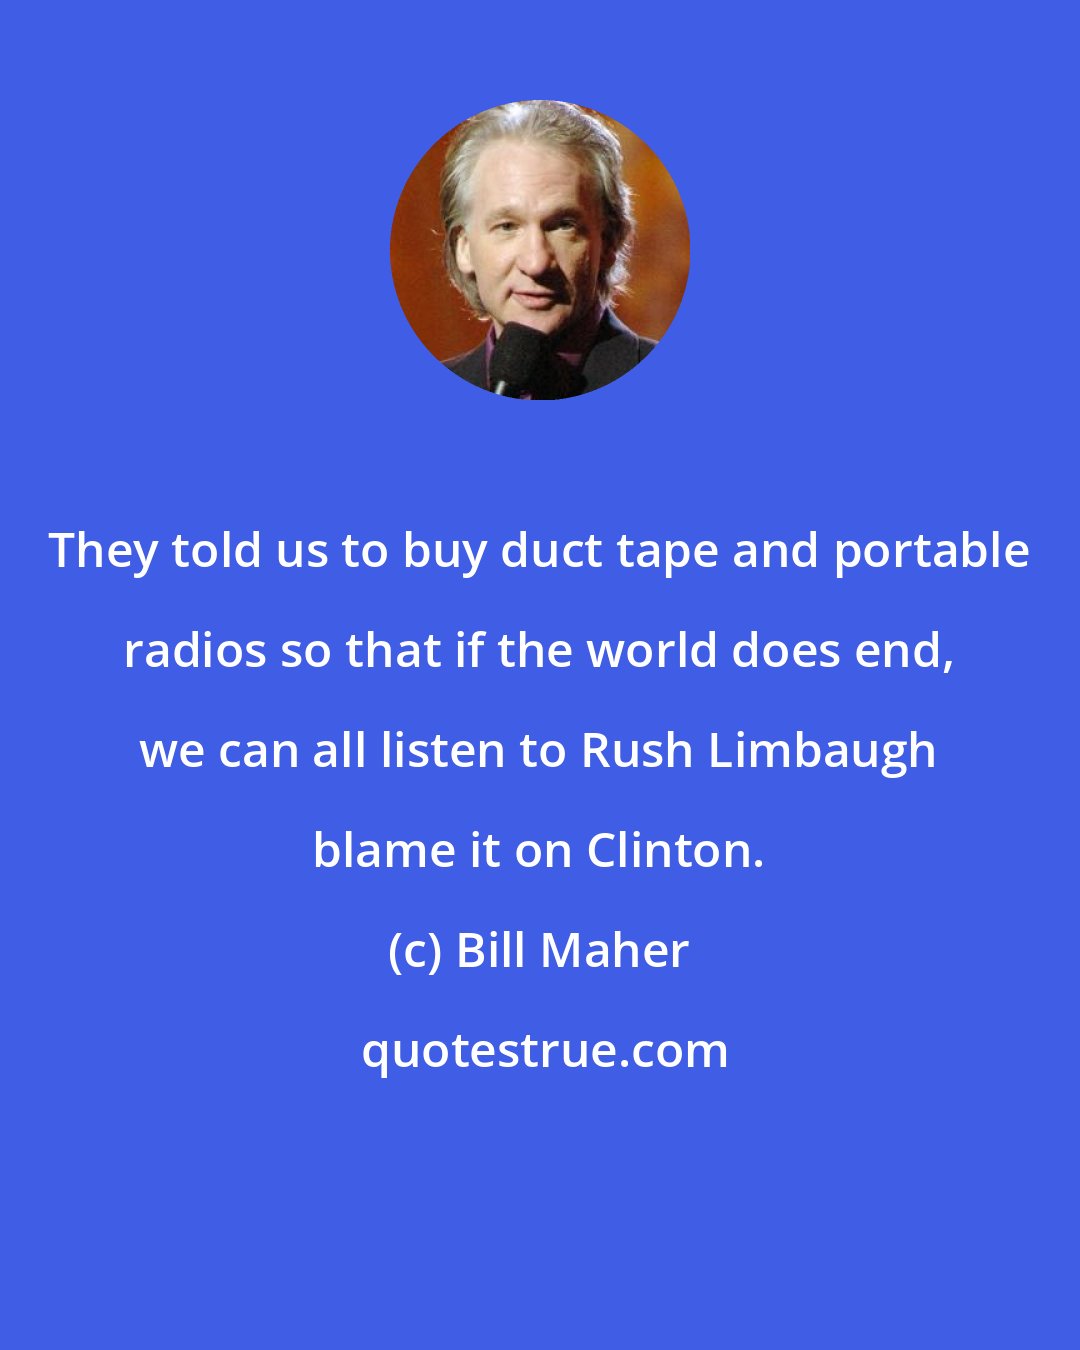 Bill Maher: They told us to buy duct tape and portable radios so that if the world does end, we can all listen to Rush Limbaugh blame it on Clinton.